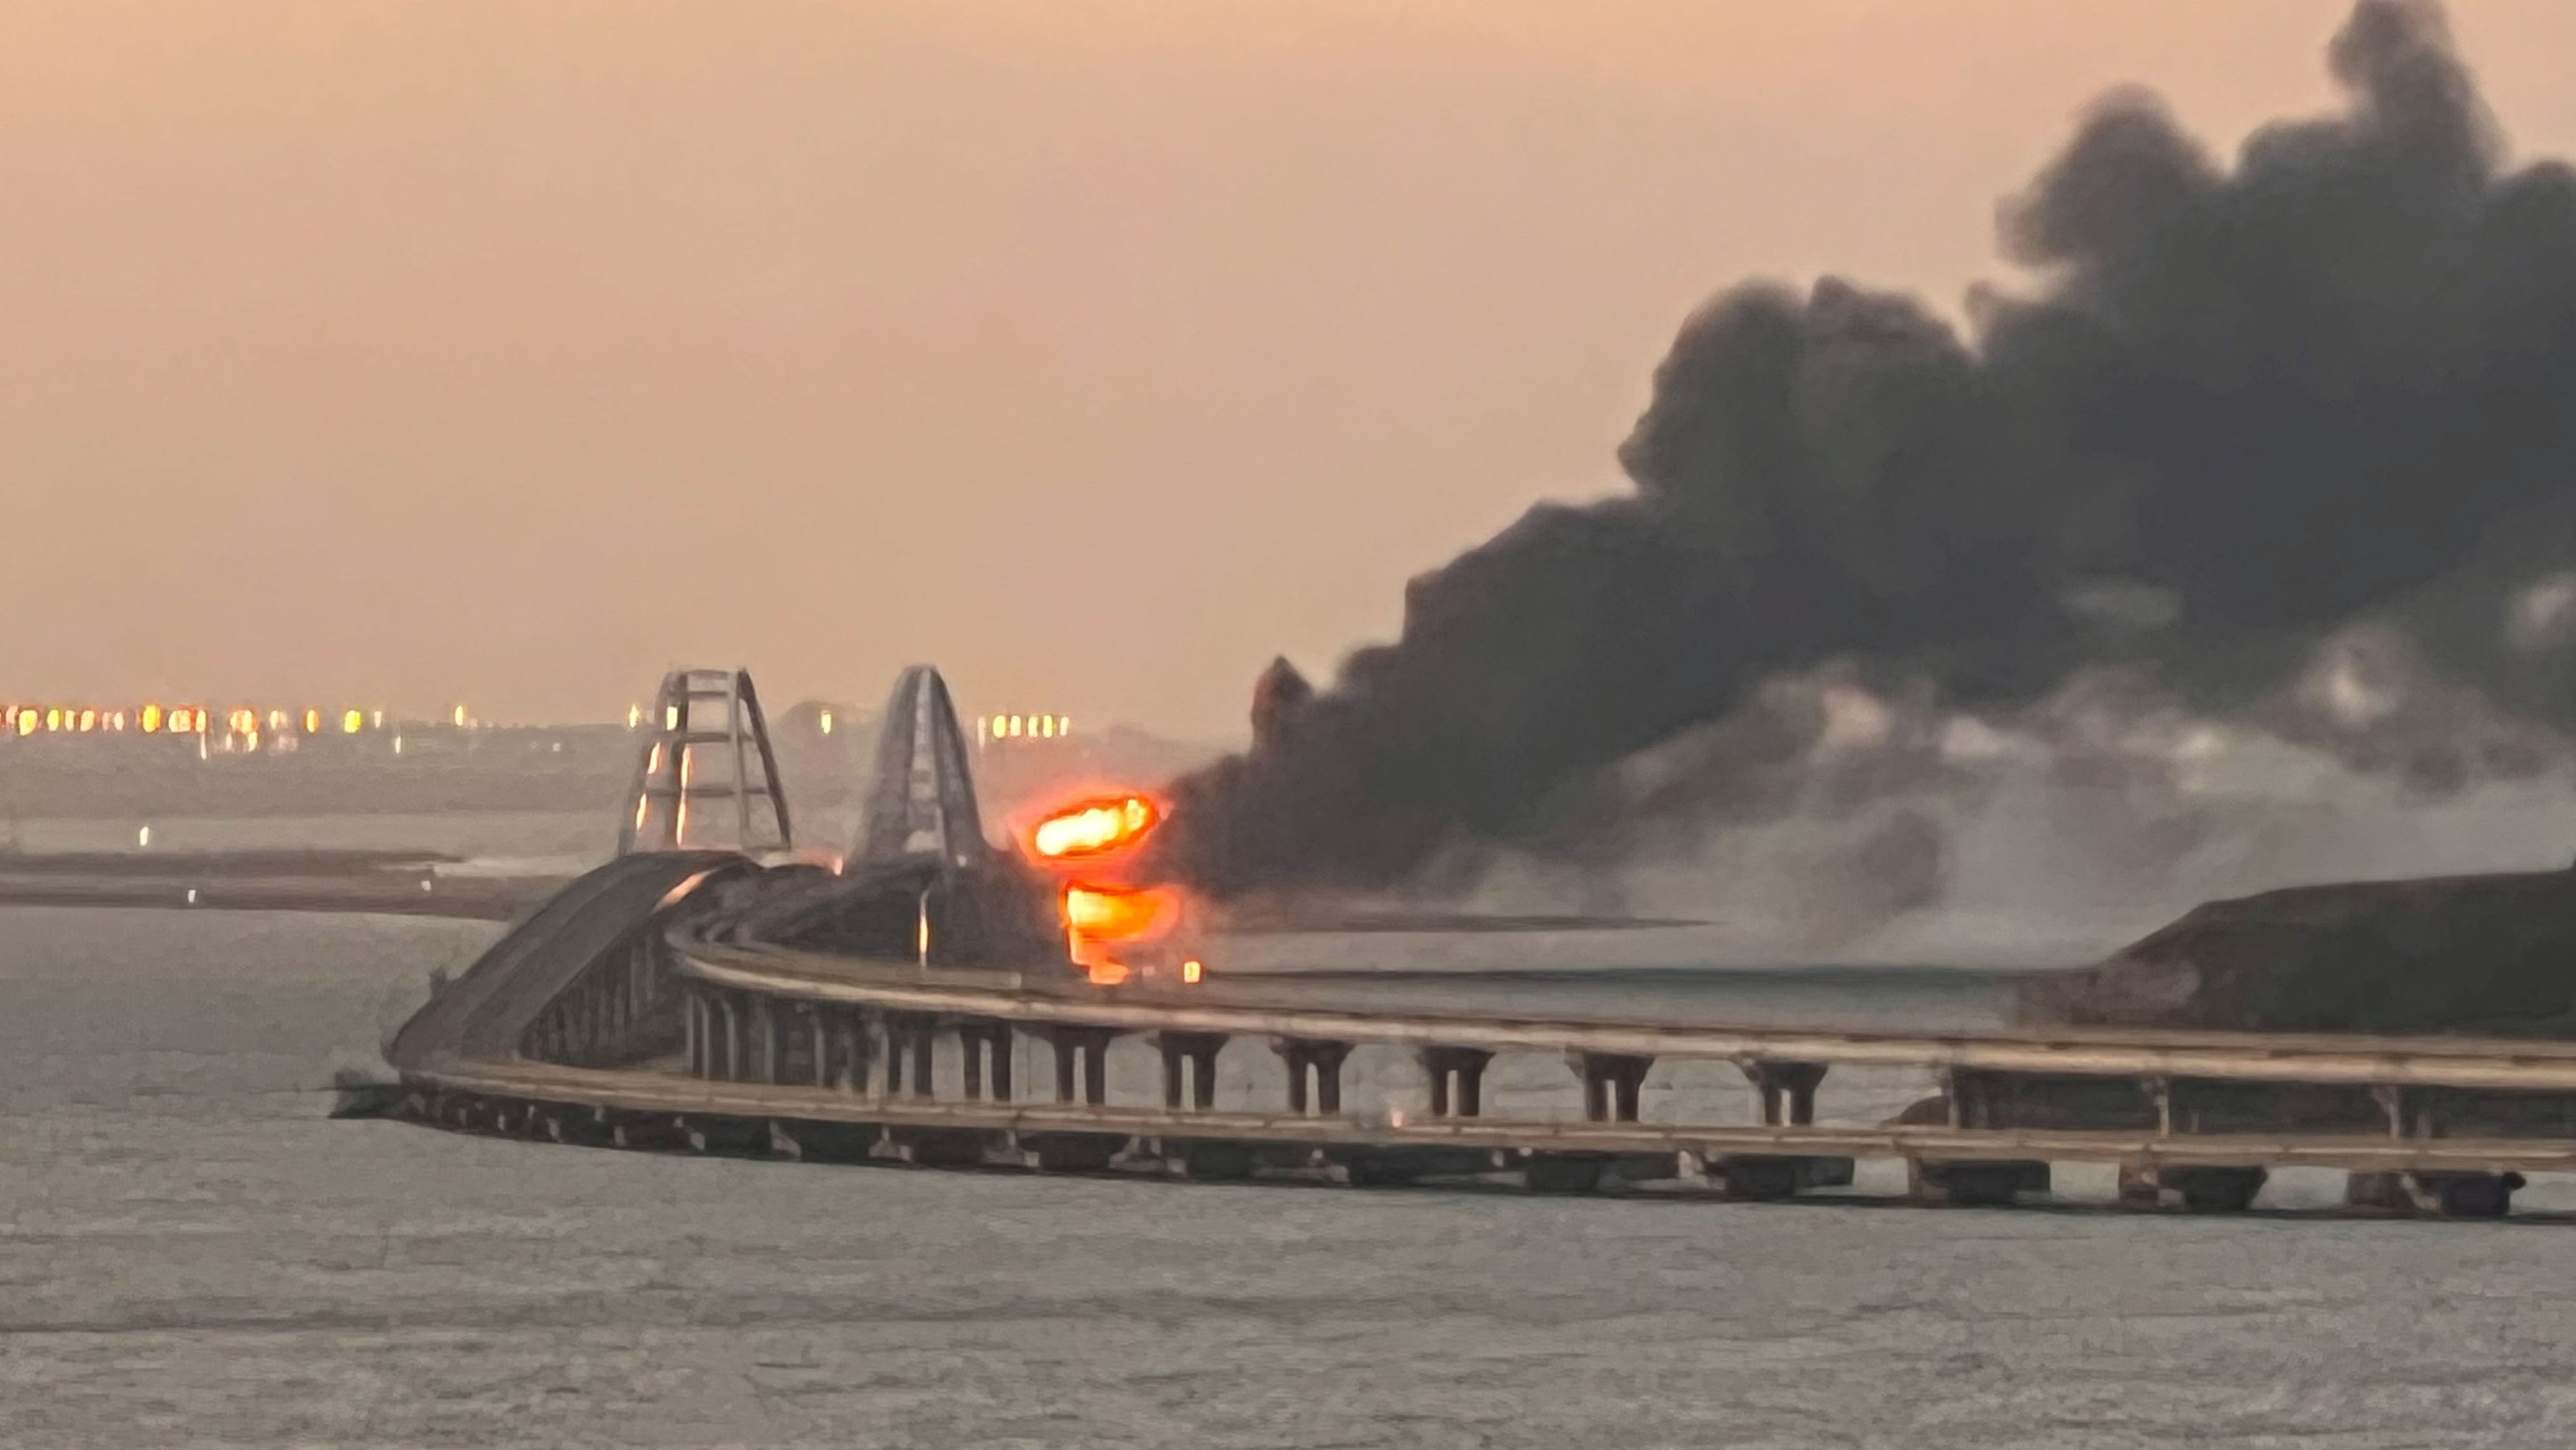 Russia officials have suggested the explosion was caused by a truck blowing up on the bridge.